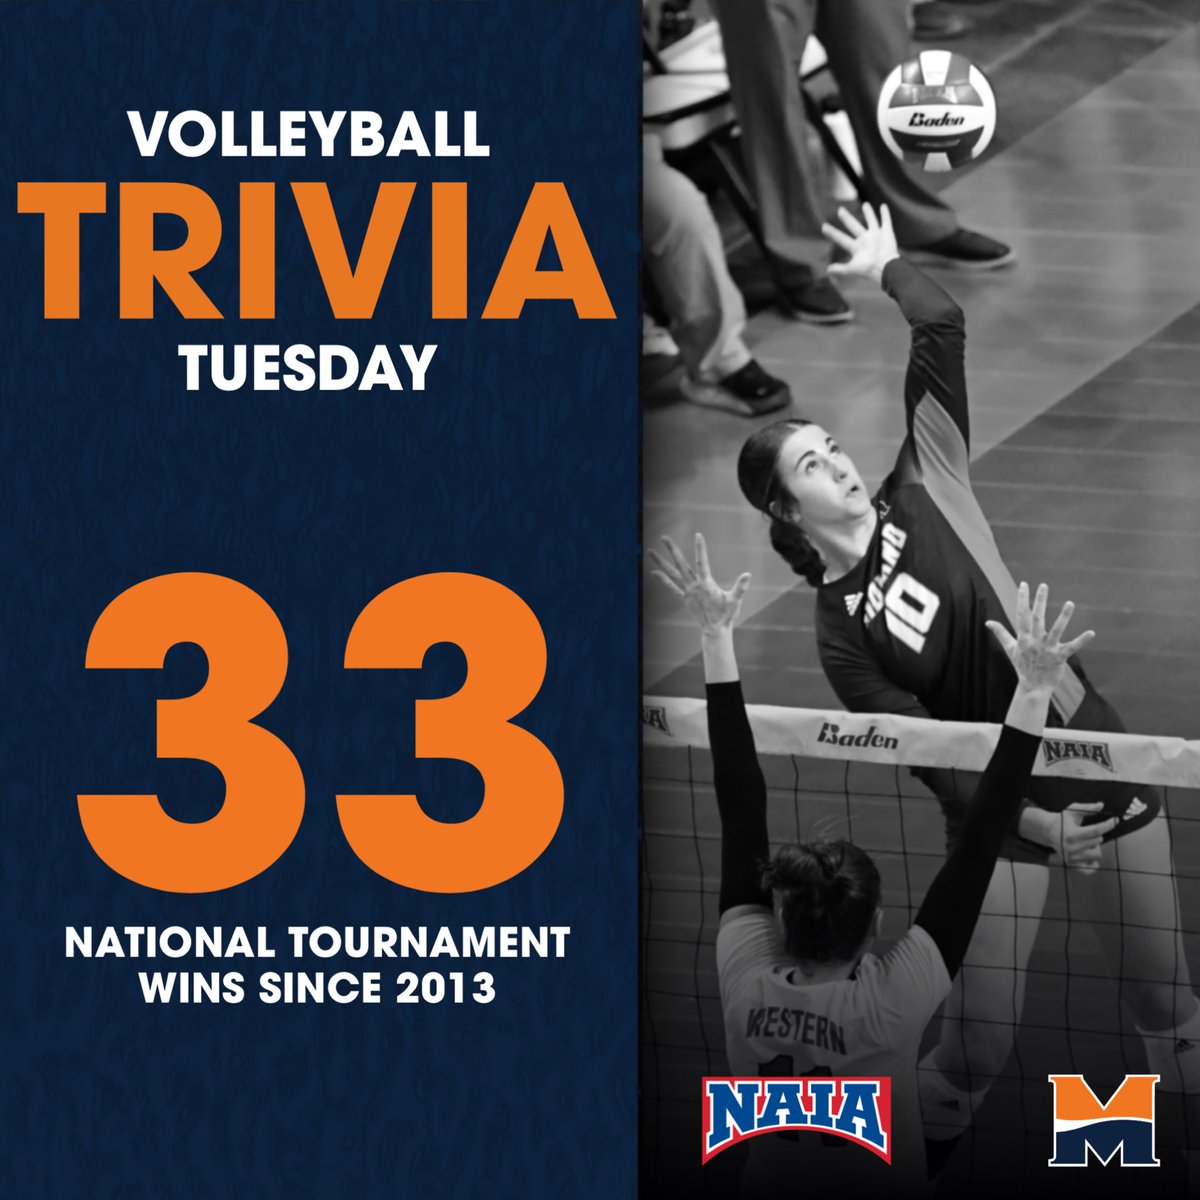 Winning when it counts. 👊 Since 2013, Midland Volleyball has 3️⃣3️⃣ wins and a .672 winning percentage at the NAIA national tournament. That win total ranks SECOND nationally among all NAIA volleyball programs.